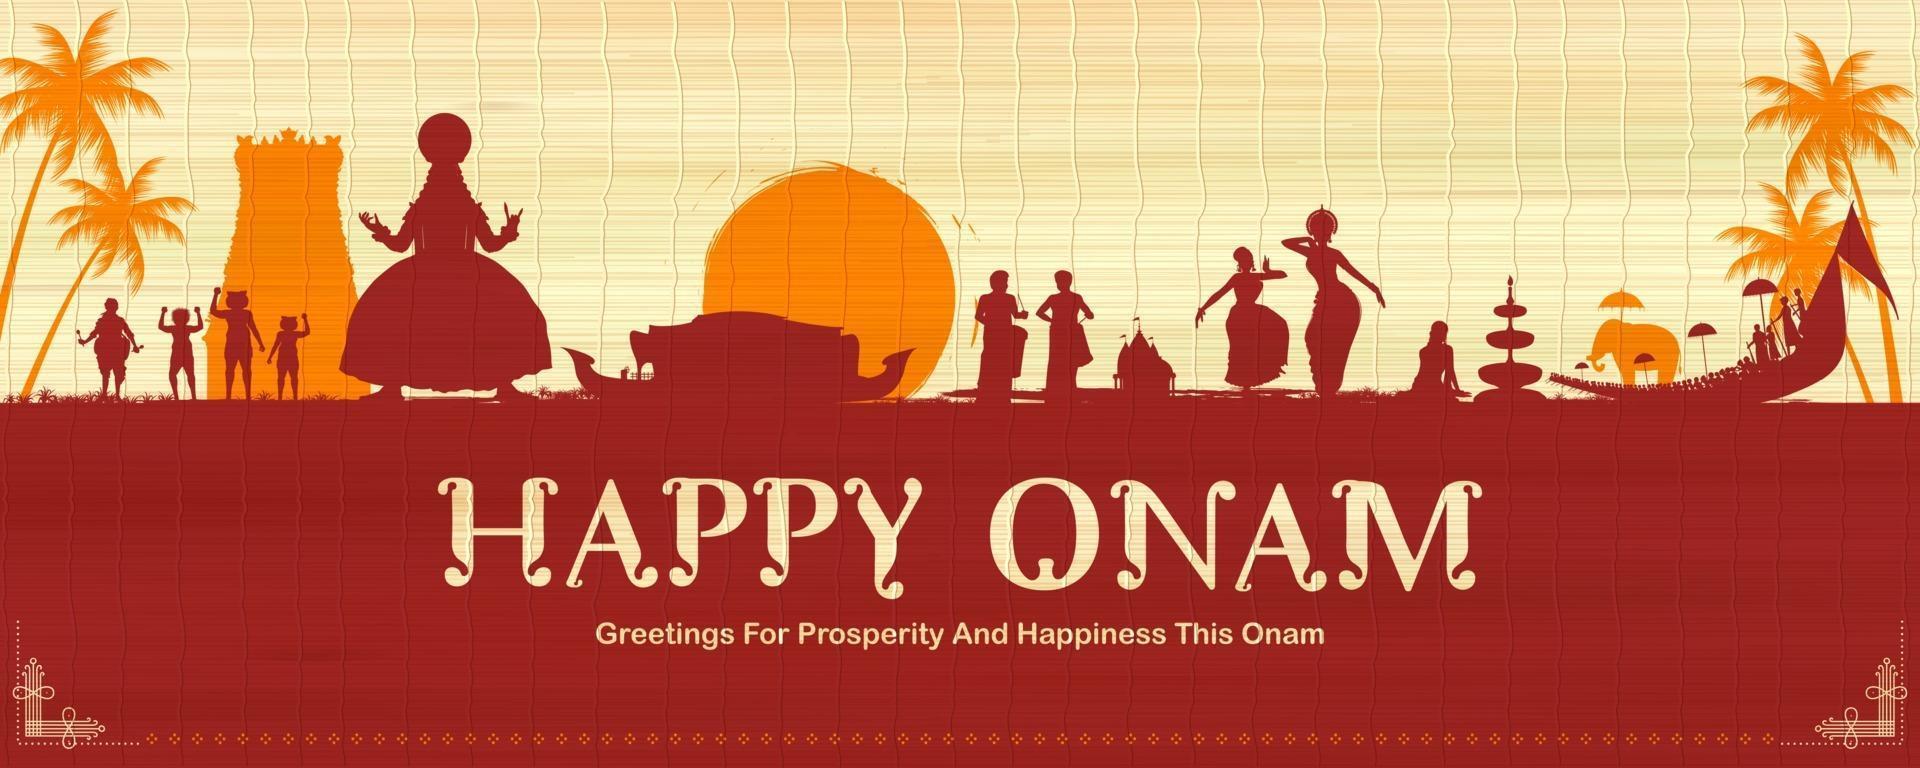 Onam traditional festival background of South India vector